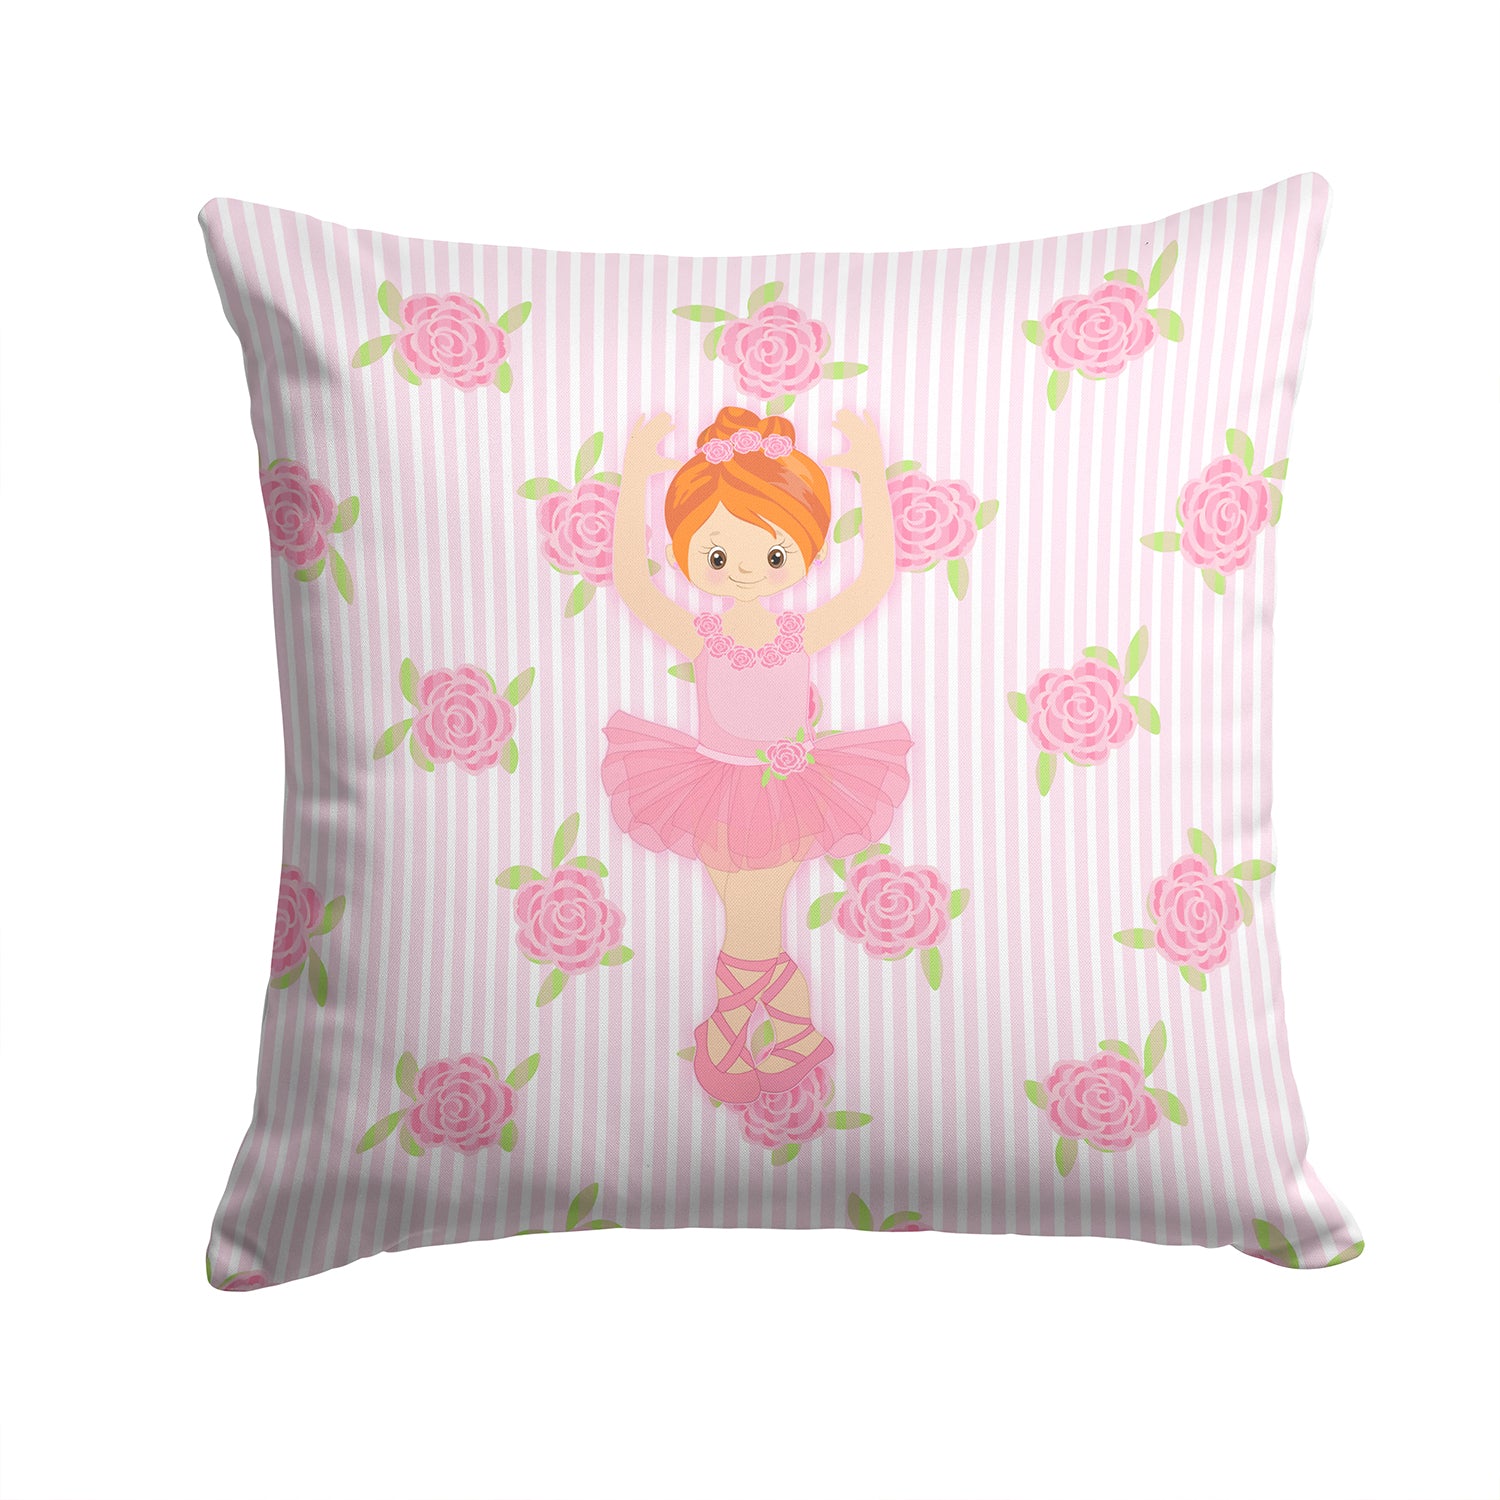 Ballerina Red Front Pose Fabric Decorative Pillow BB5169PW1414 - the-store.com